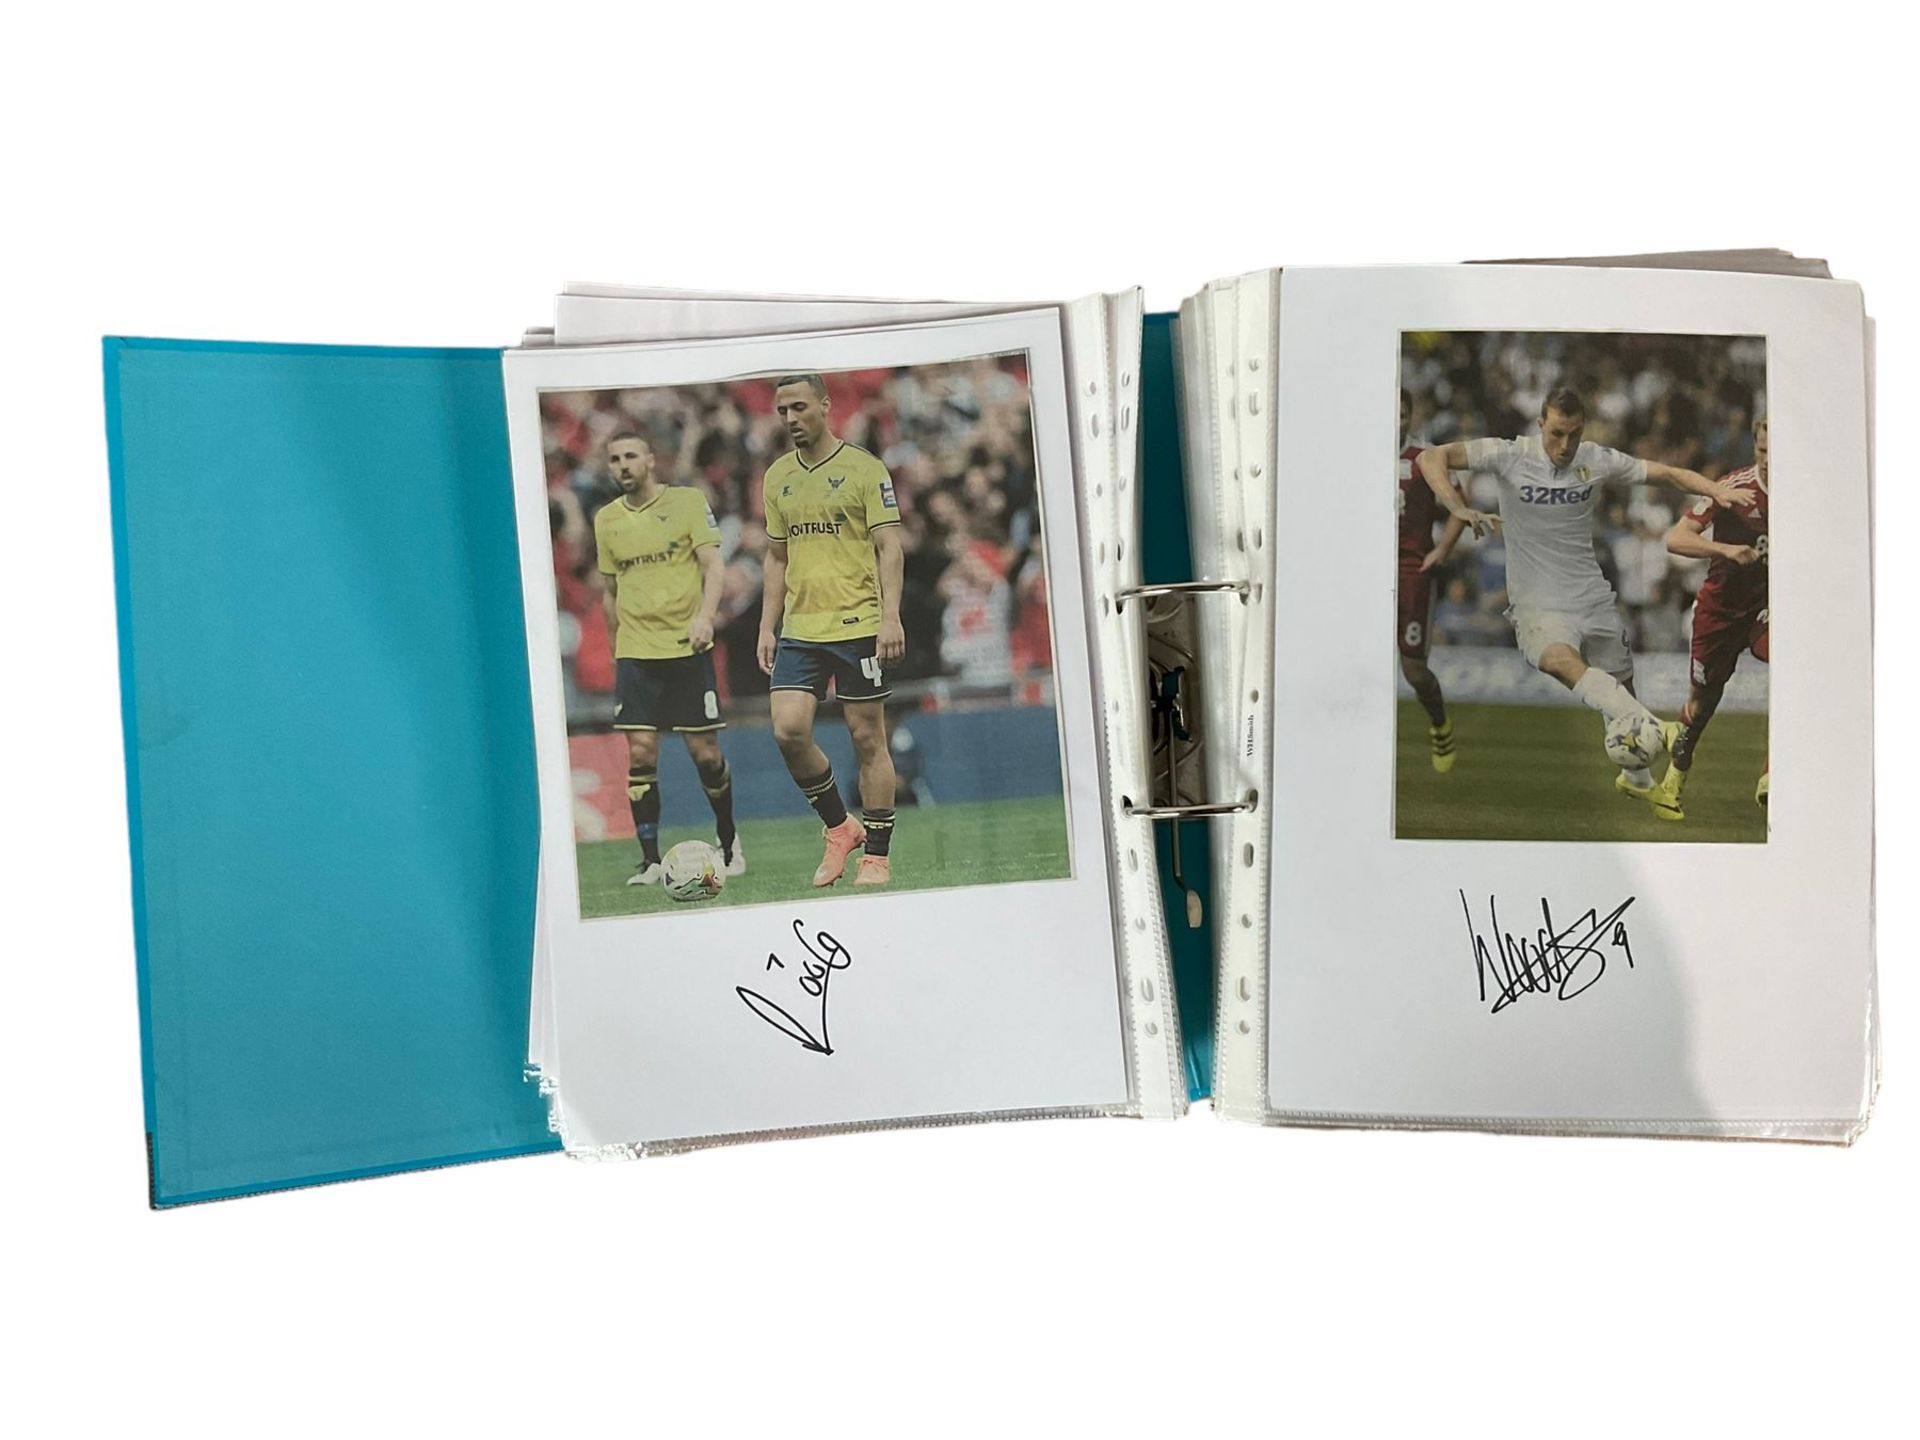 Leeds United football club - various autographs and signatures including Rob Green - Image 6 of 14